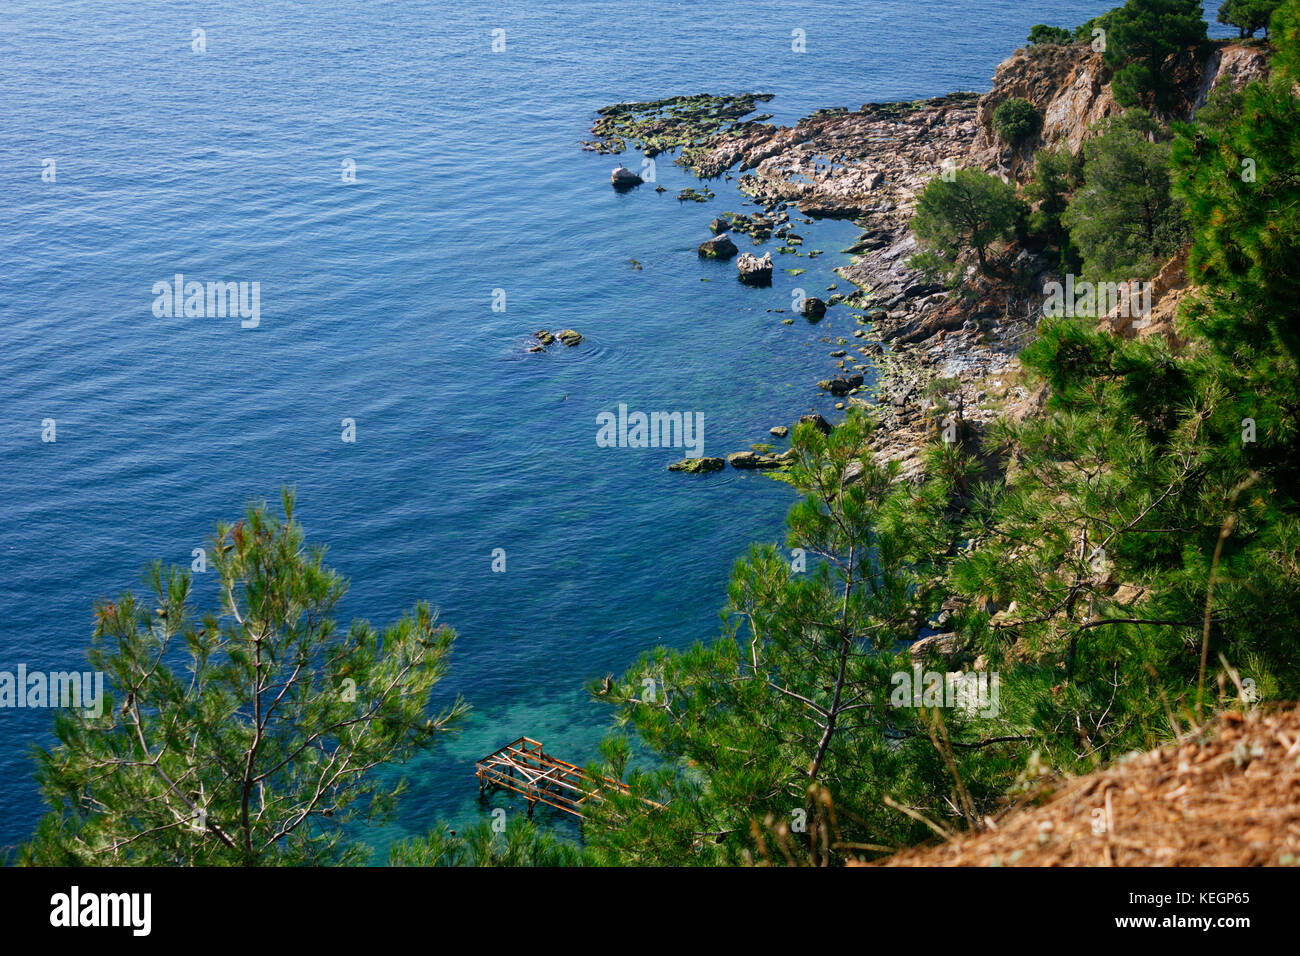 Mountainside covered with pines in Marmara sea selective focus Stock Photo